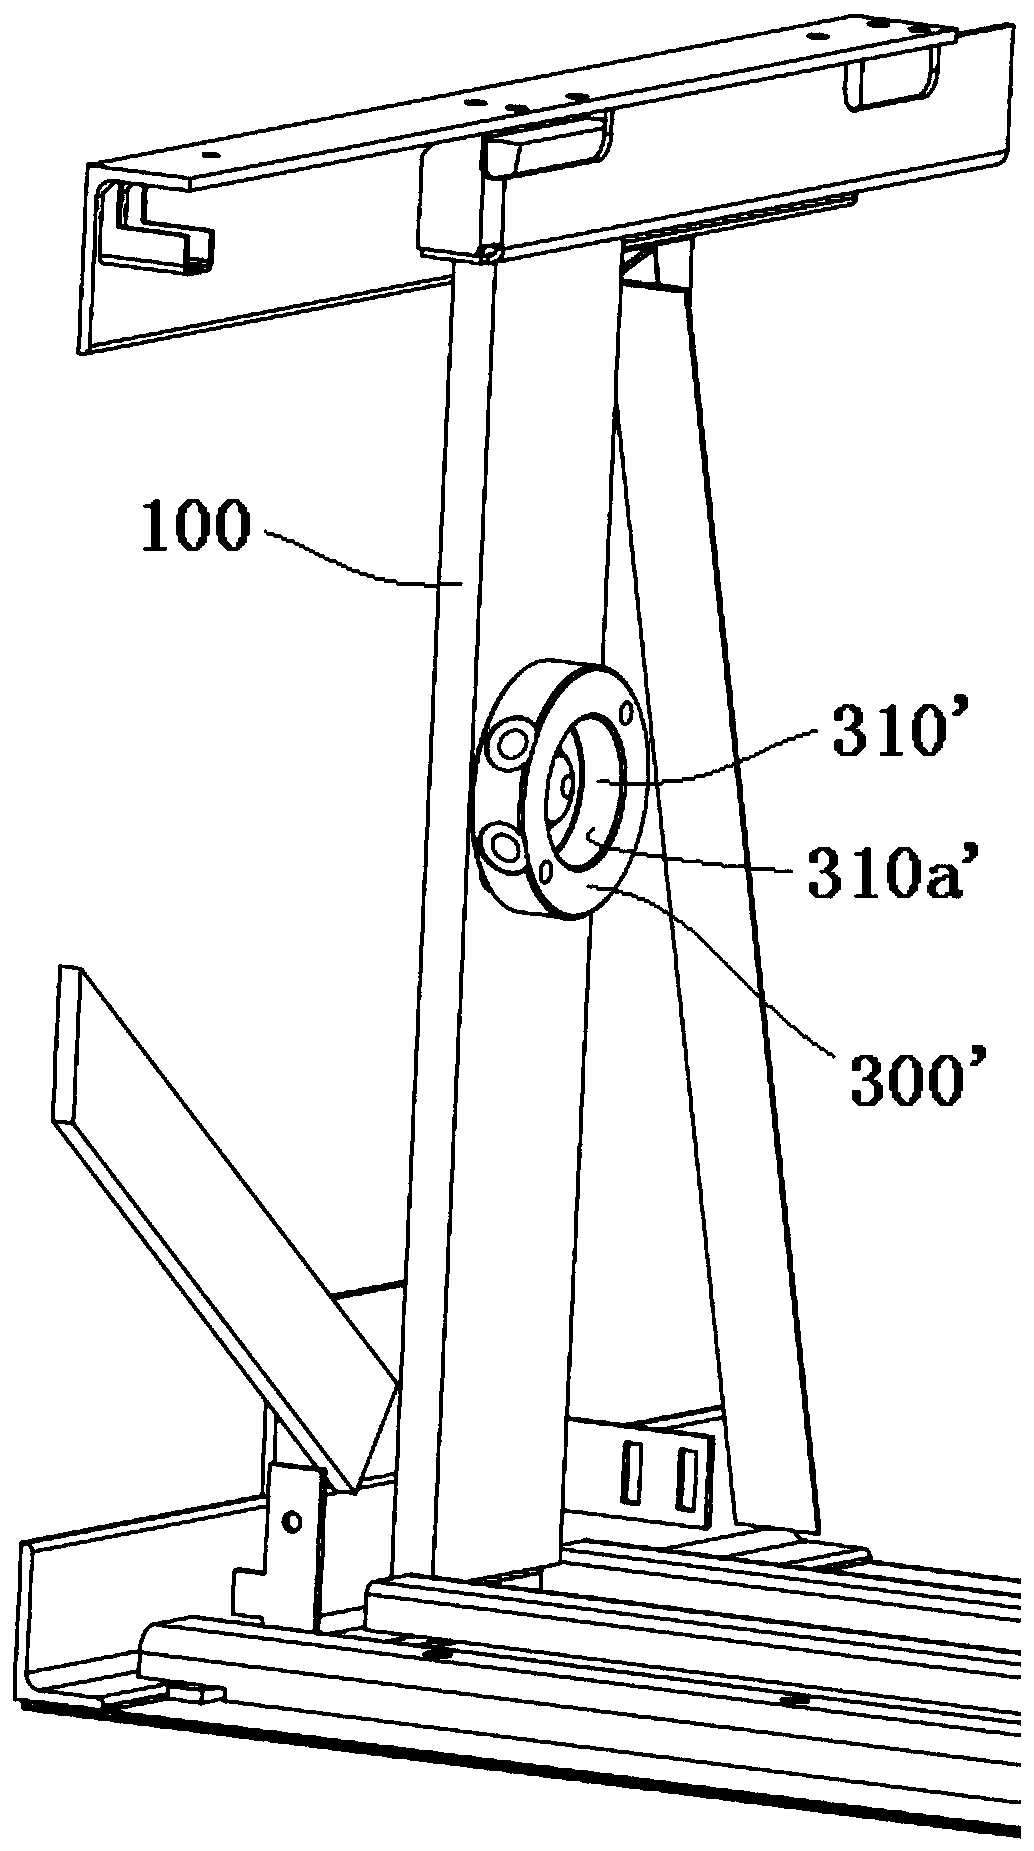 Method used for replacing escalator driving spindle